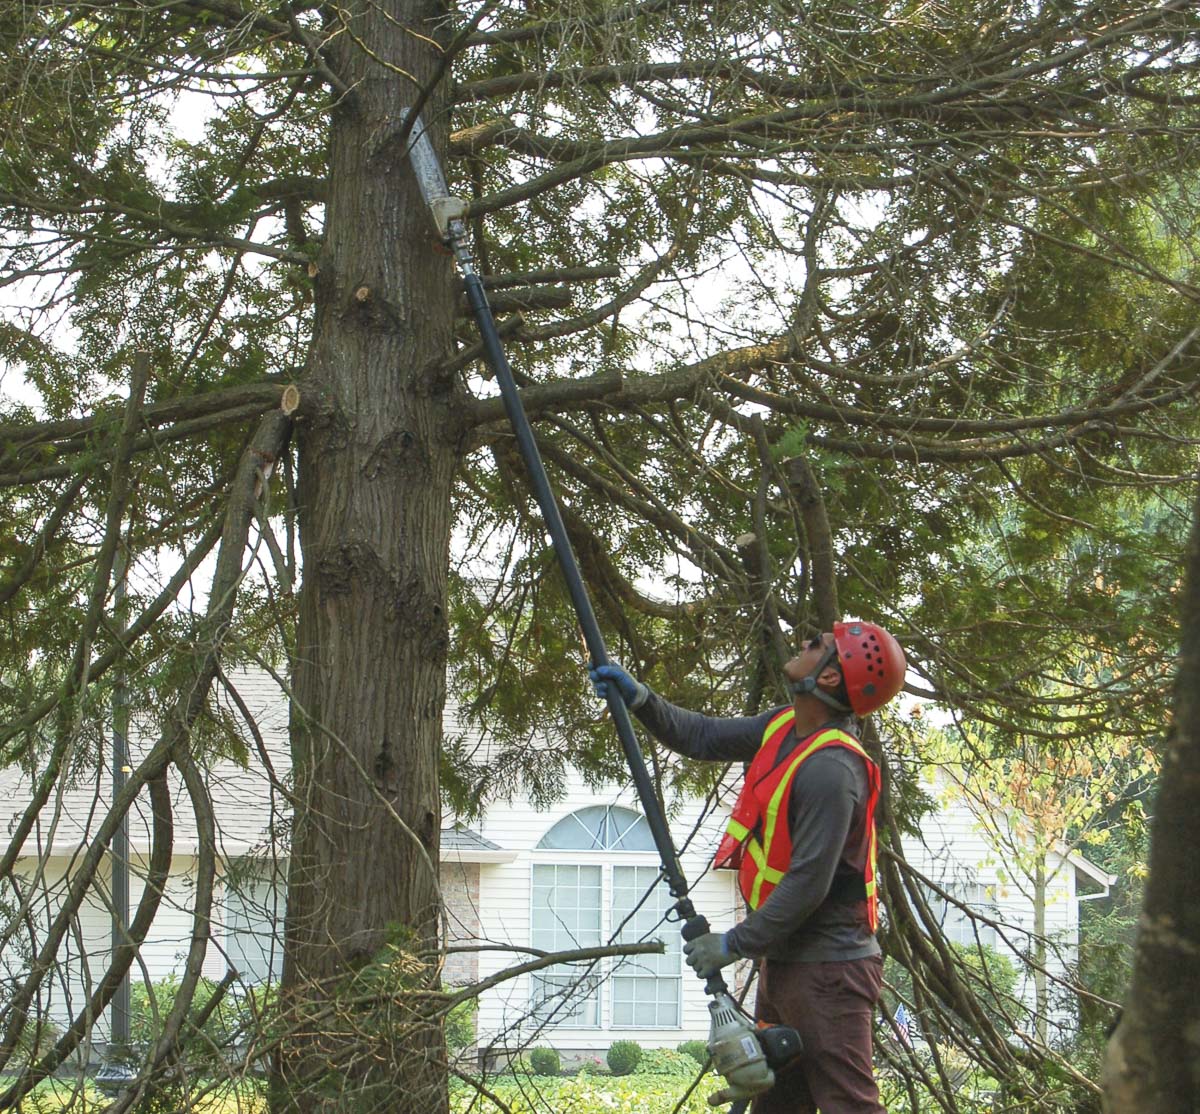 Proper pruning by certified arborists promotes healthy trees. Photo courtesy of city of Vancouver